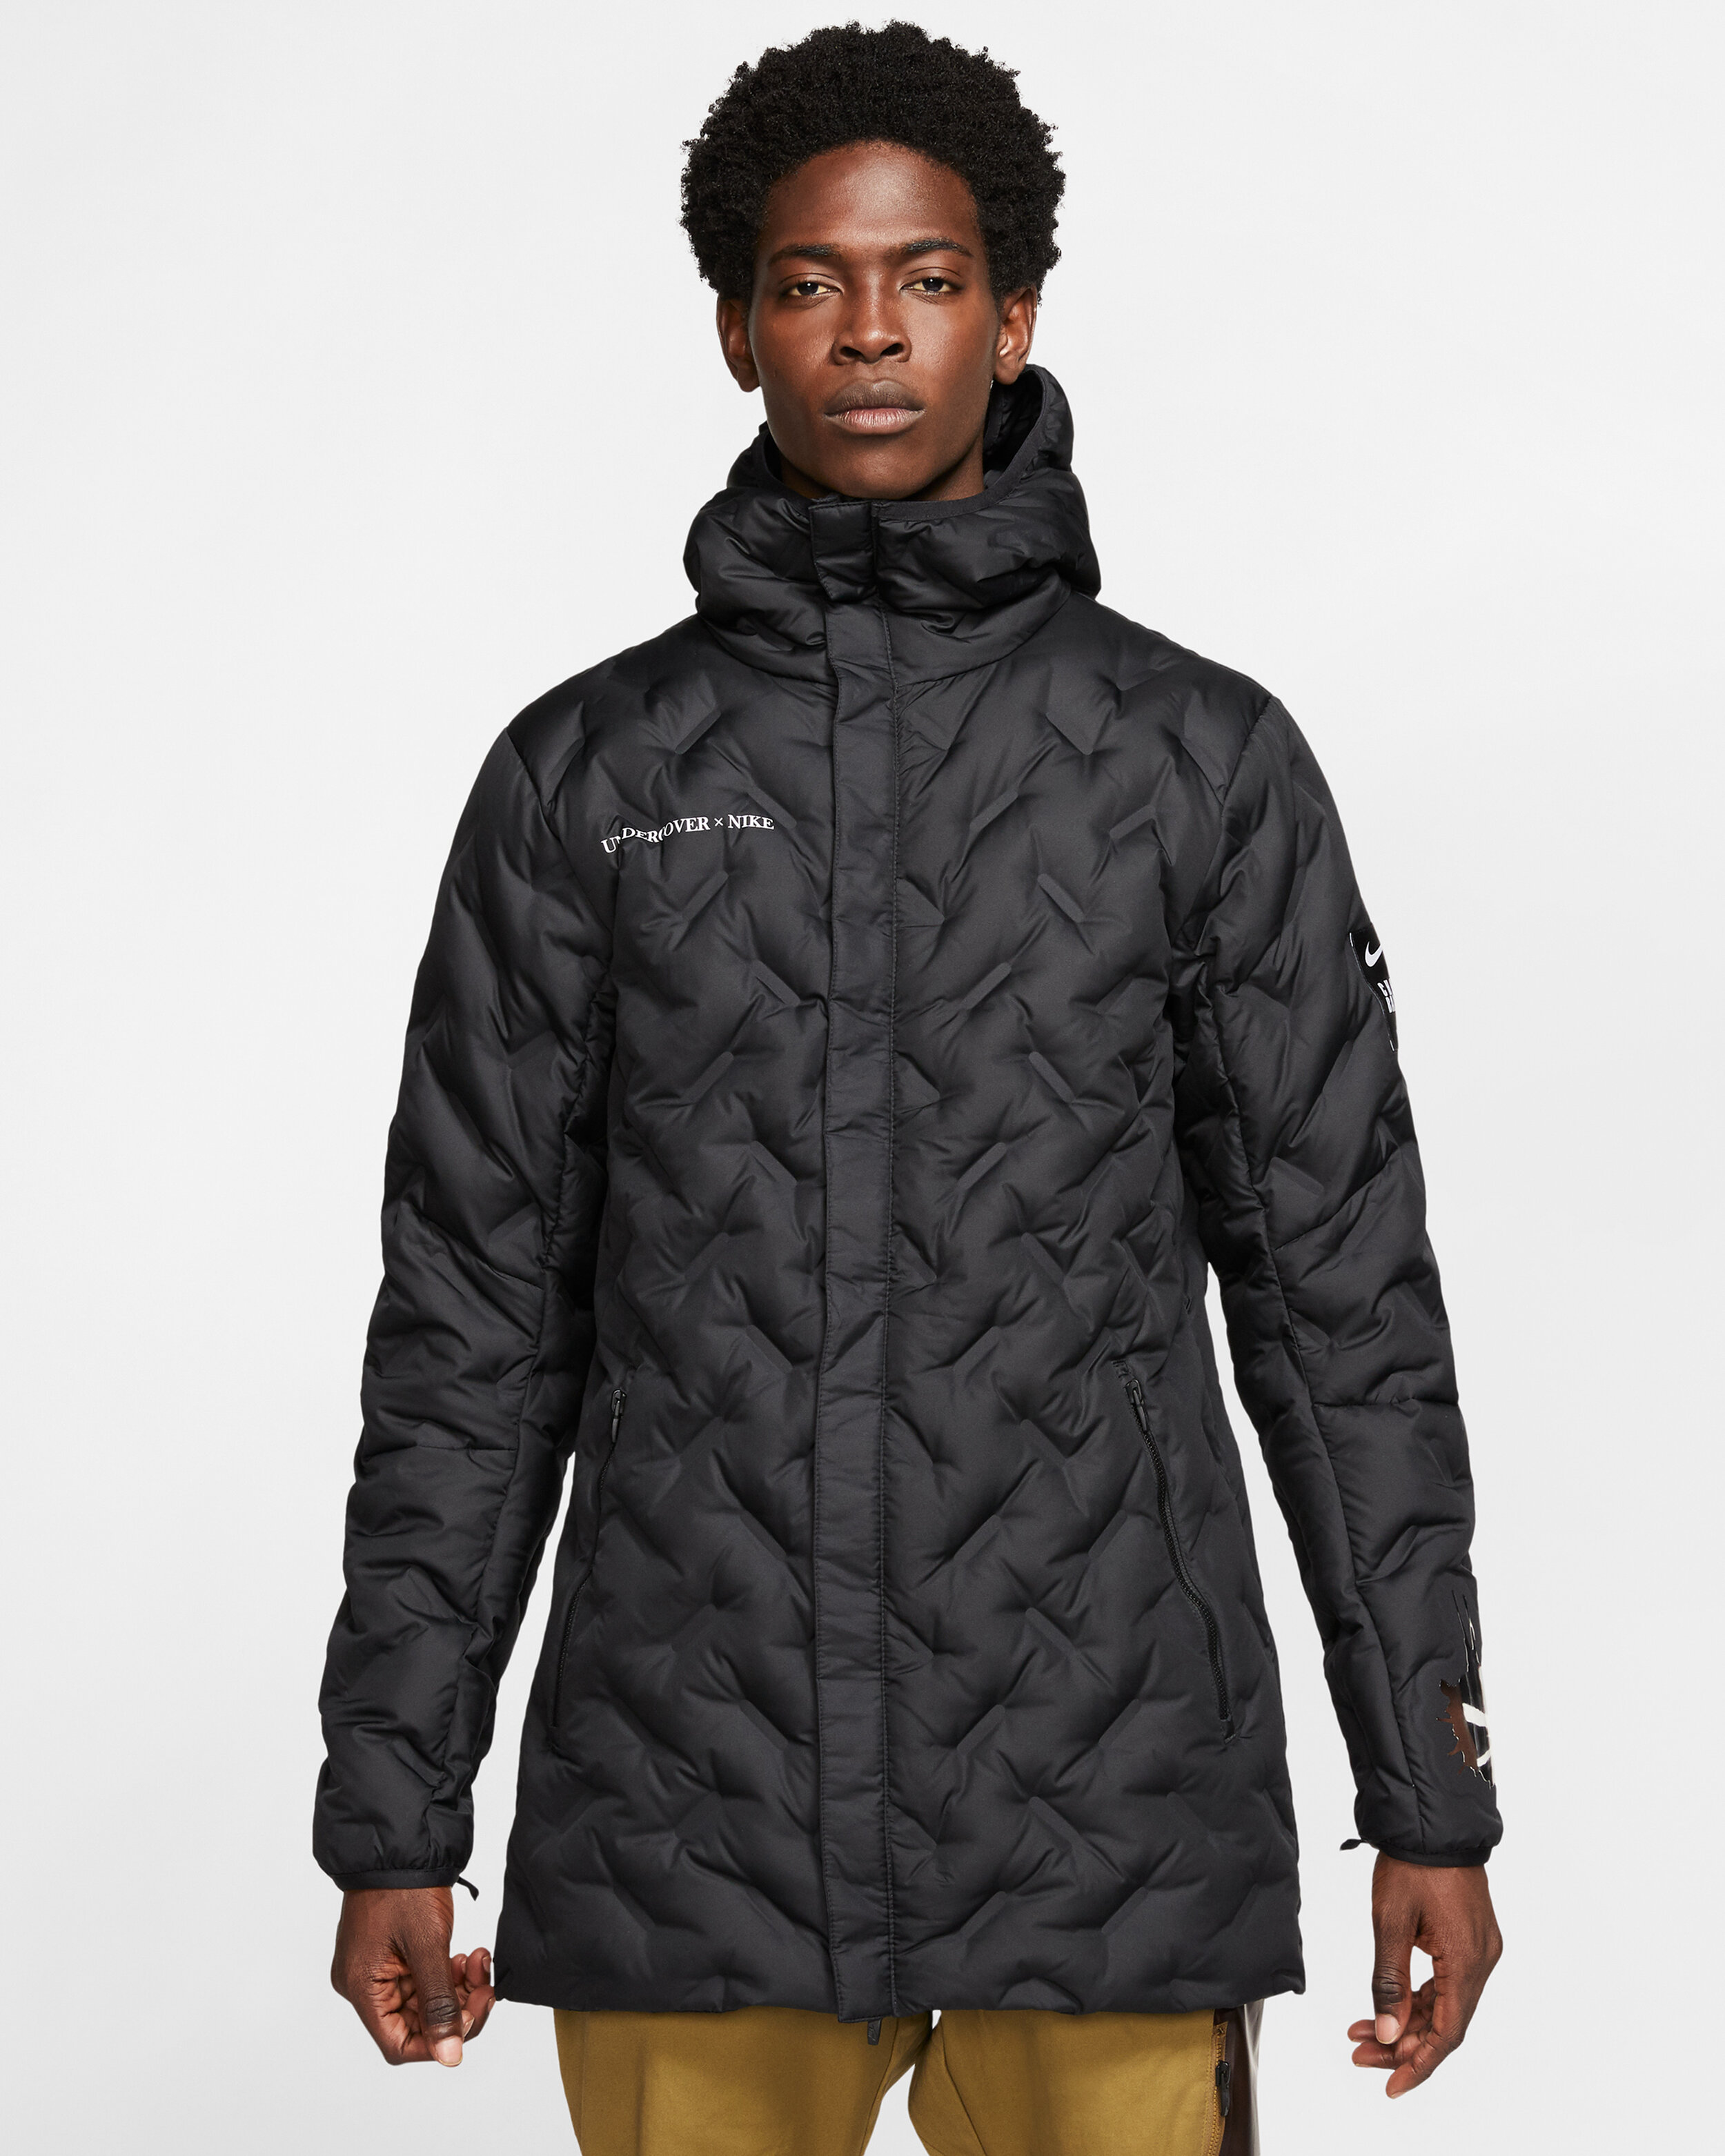 nike-x-undercover-winter-collection-32_92063.jpg